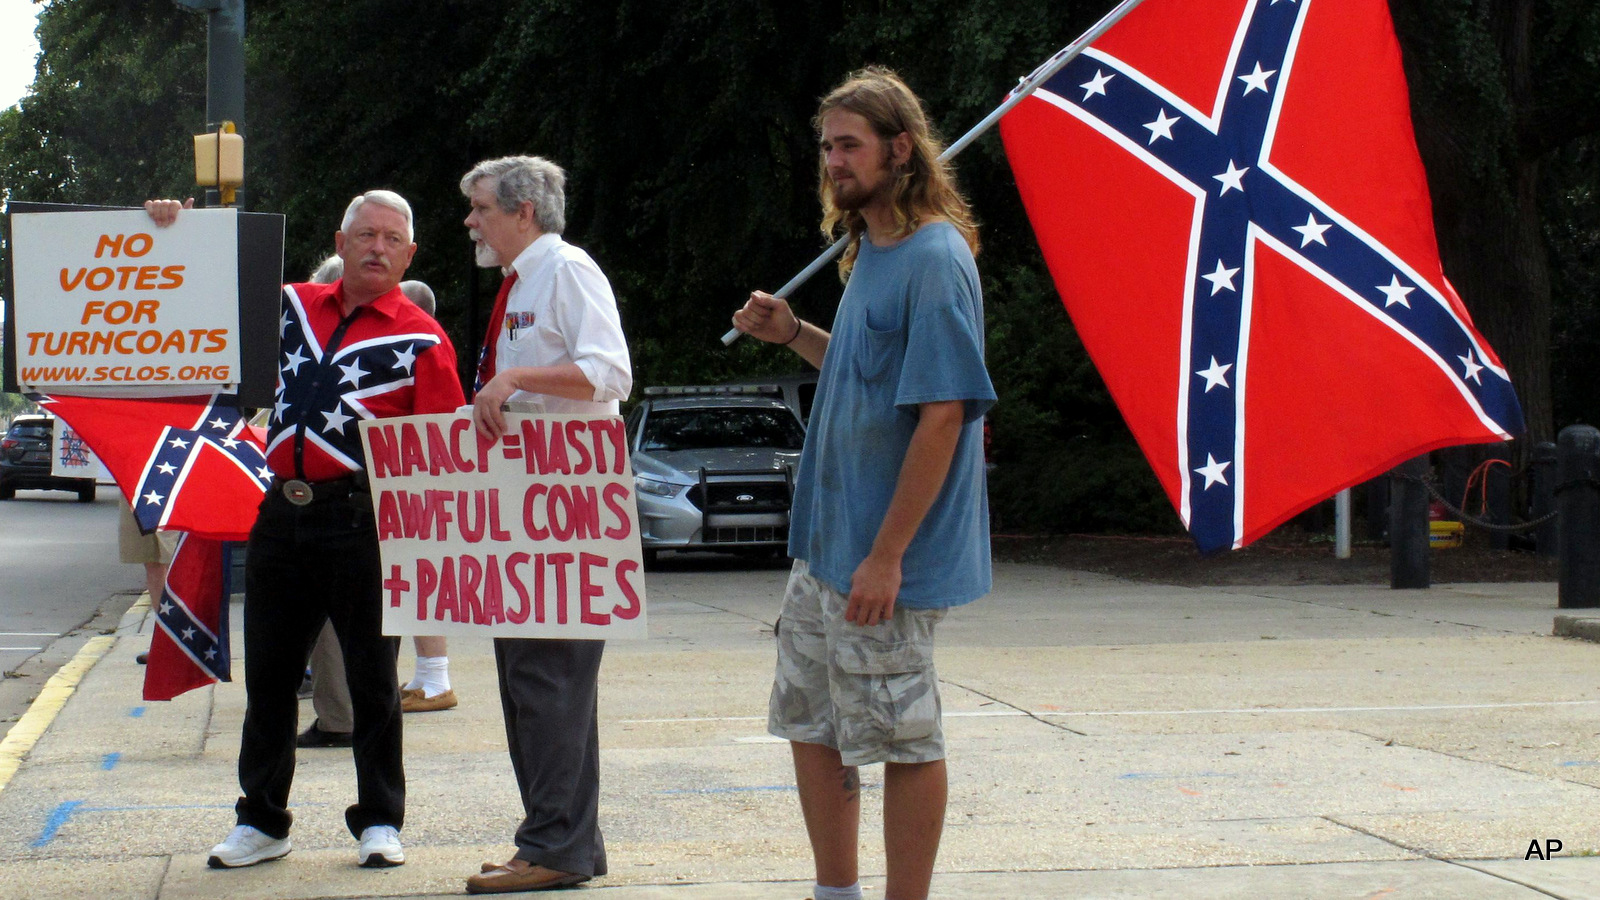 William Cheek, left, Nelson Waller, center, and Jim Collins, right, protest proposals to remove the Confederate flag from the grounds of the South Carolina Statehouse